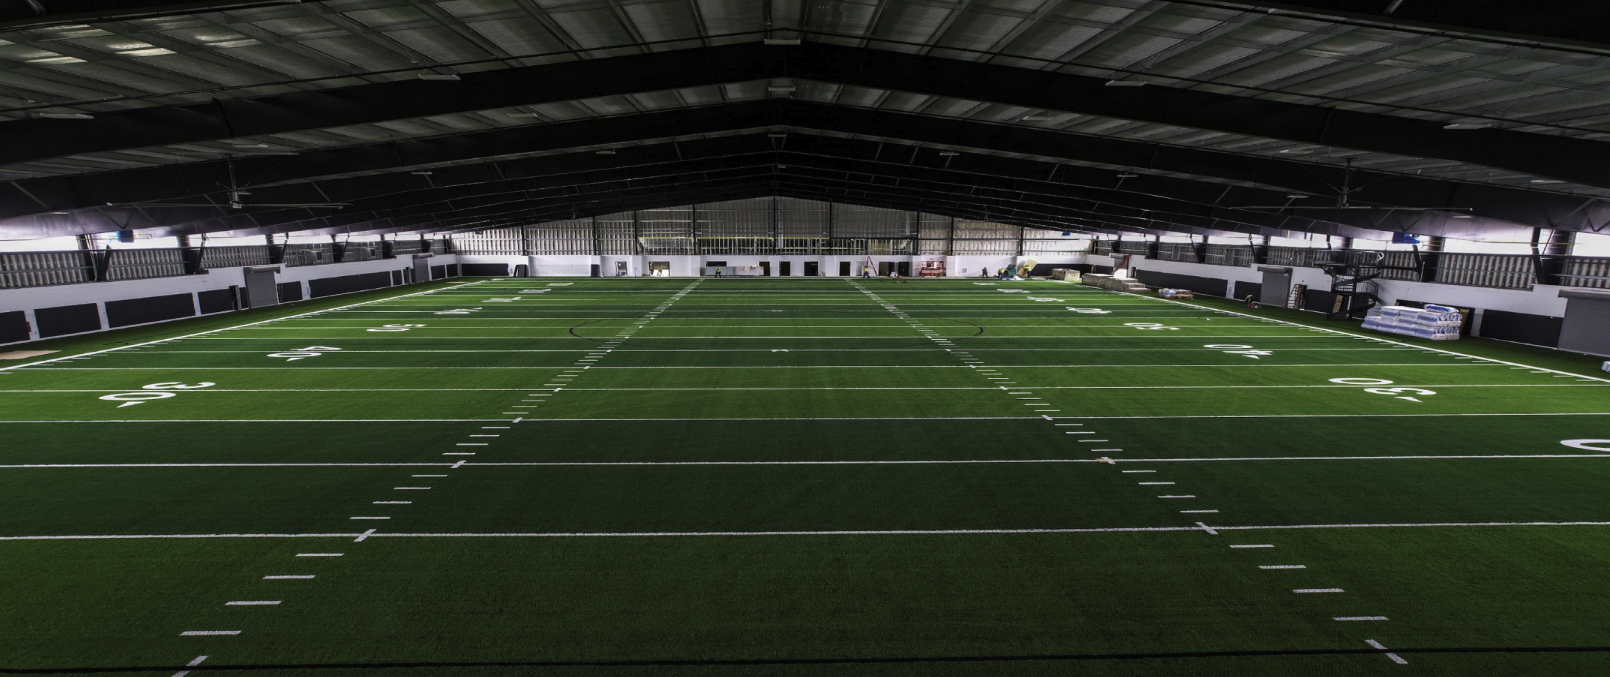 Internal view of Fossil Ridge indoor facility.